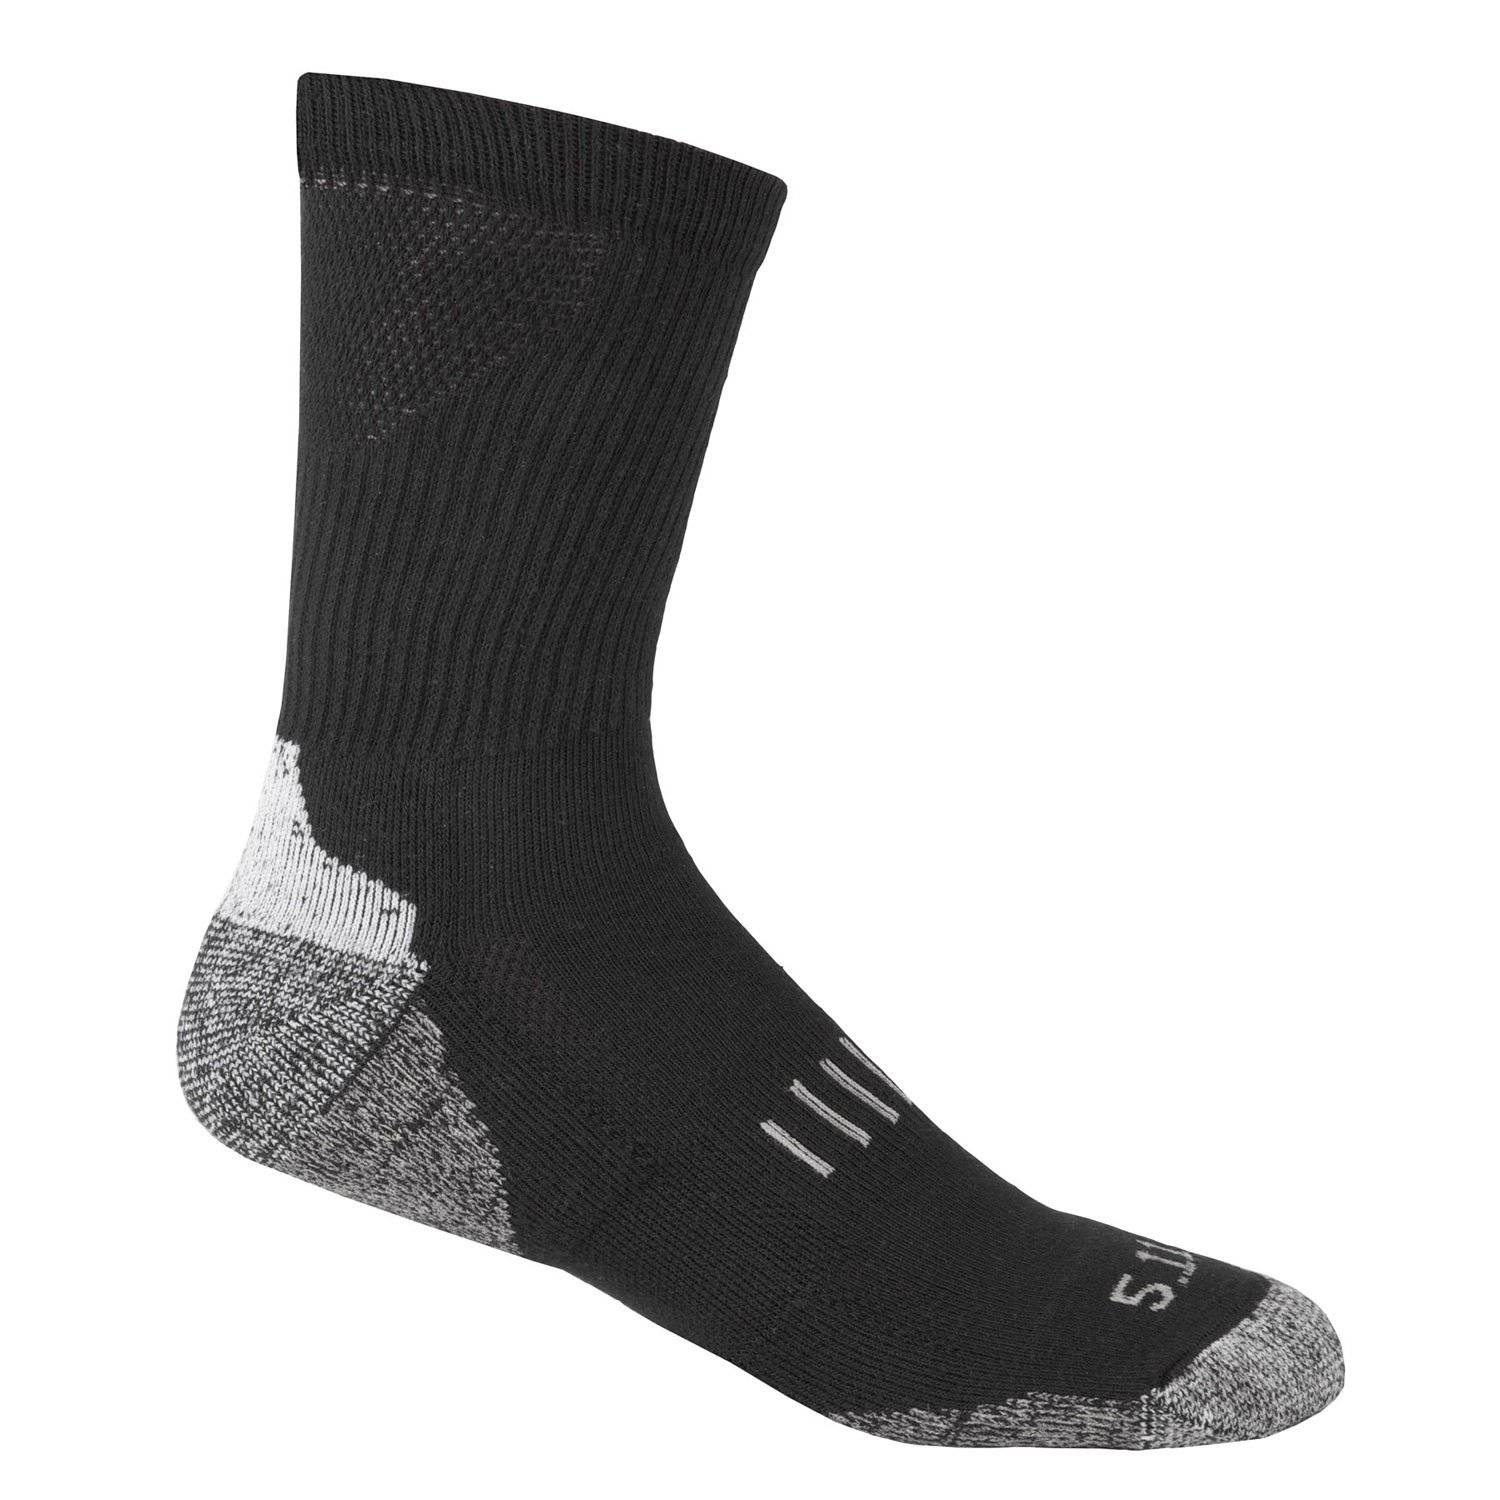 5.11 Tactical Year Round Crew Sock Black